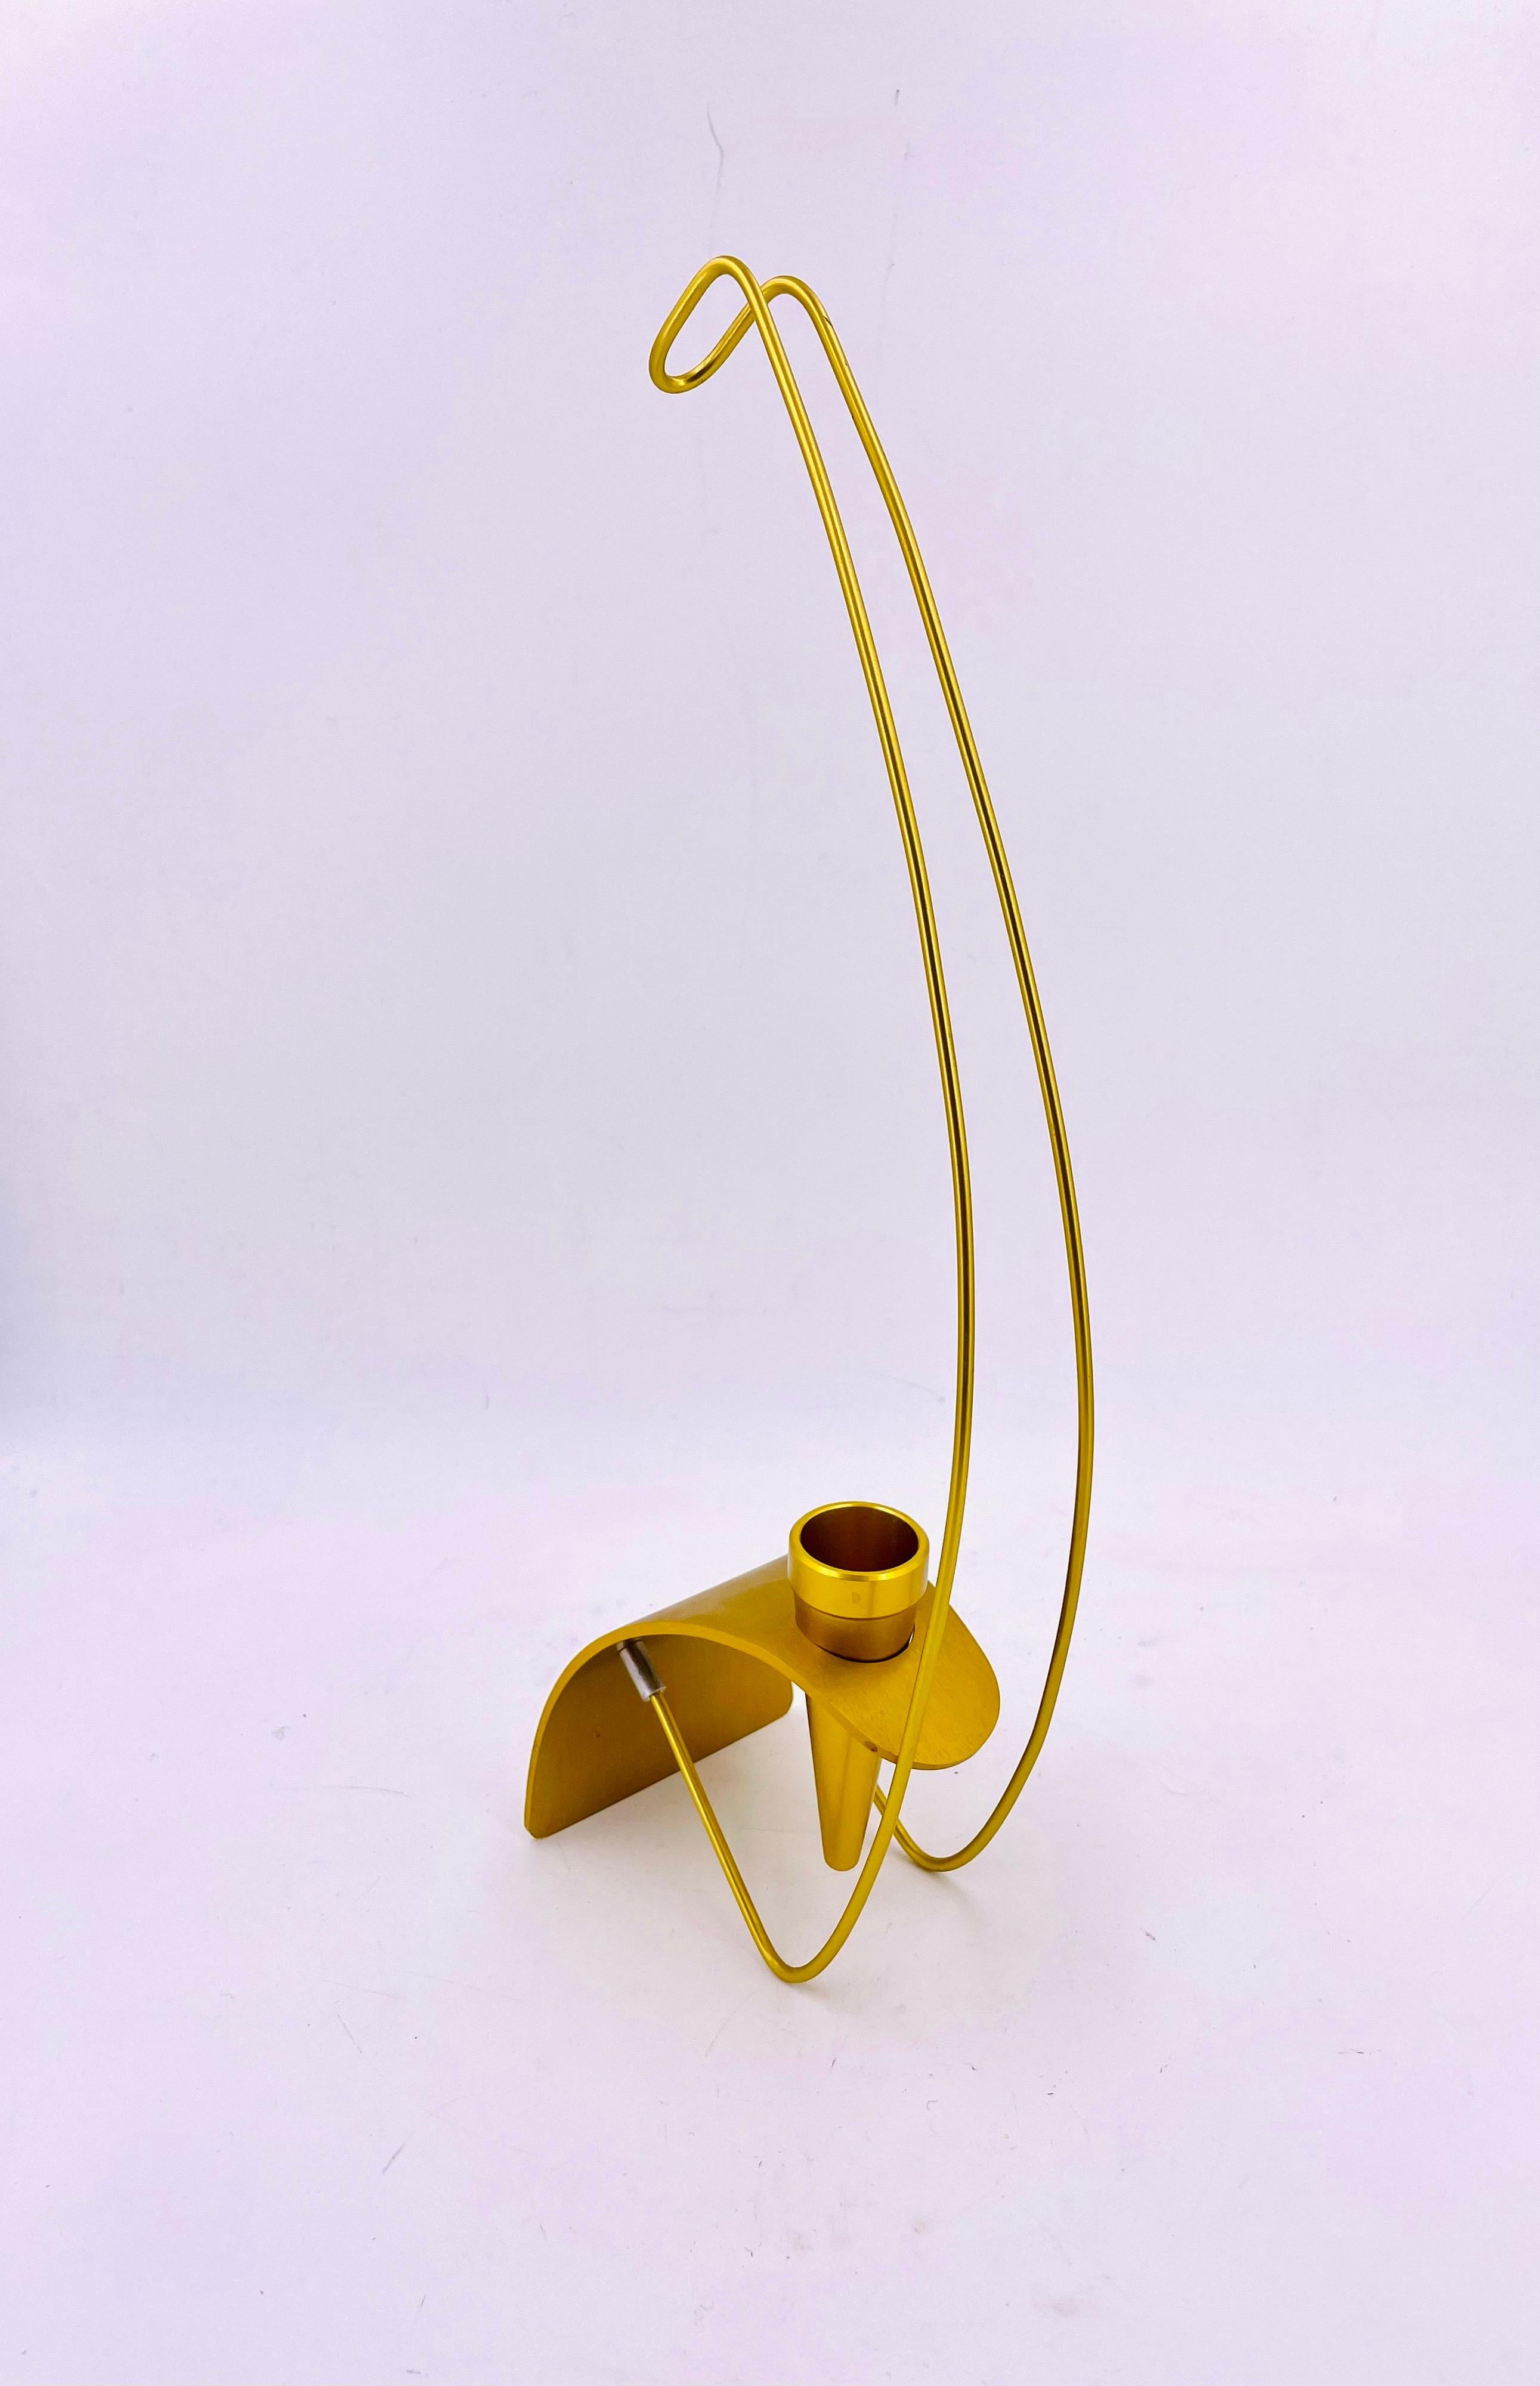 Simple elegant great 1980's post-modern design flower vase, in yellow anodized aluminum 2 parts piece.